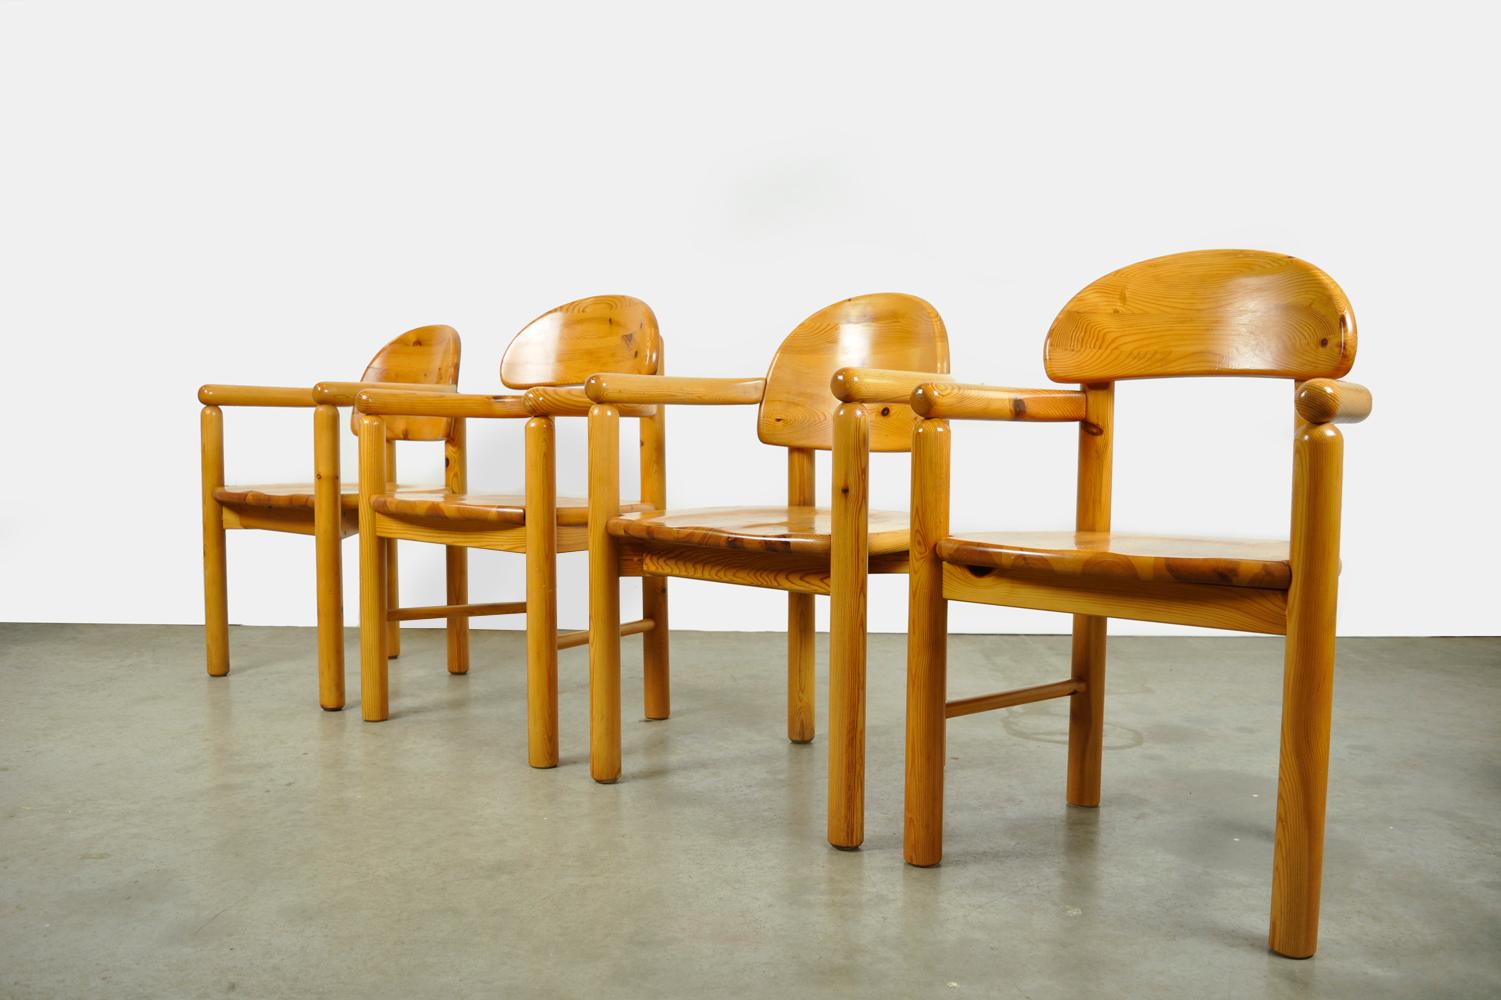 Danish 2×2 Vintage Pine Dining Chairs by Rainer Daumiller for Hirtshals Sawmills, 1970s For Sale